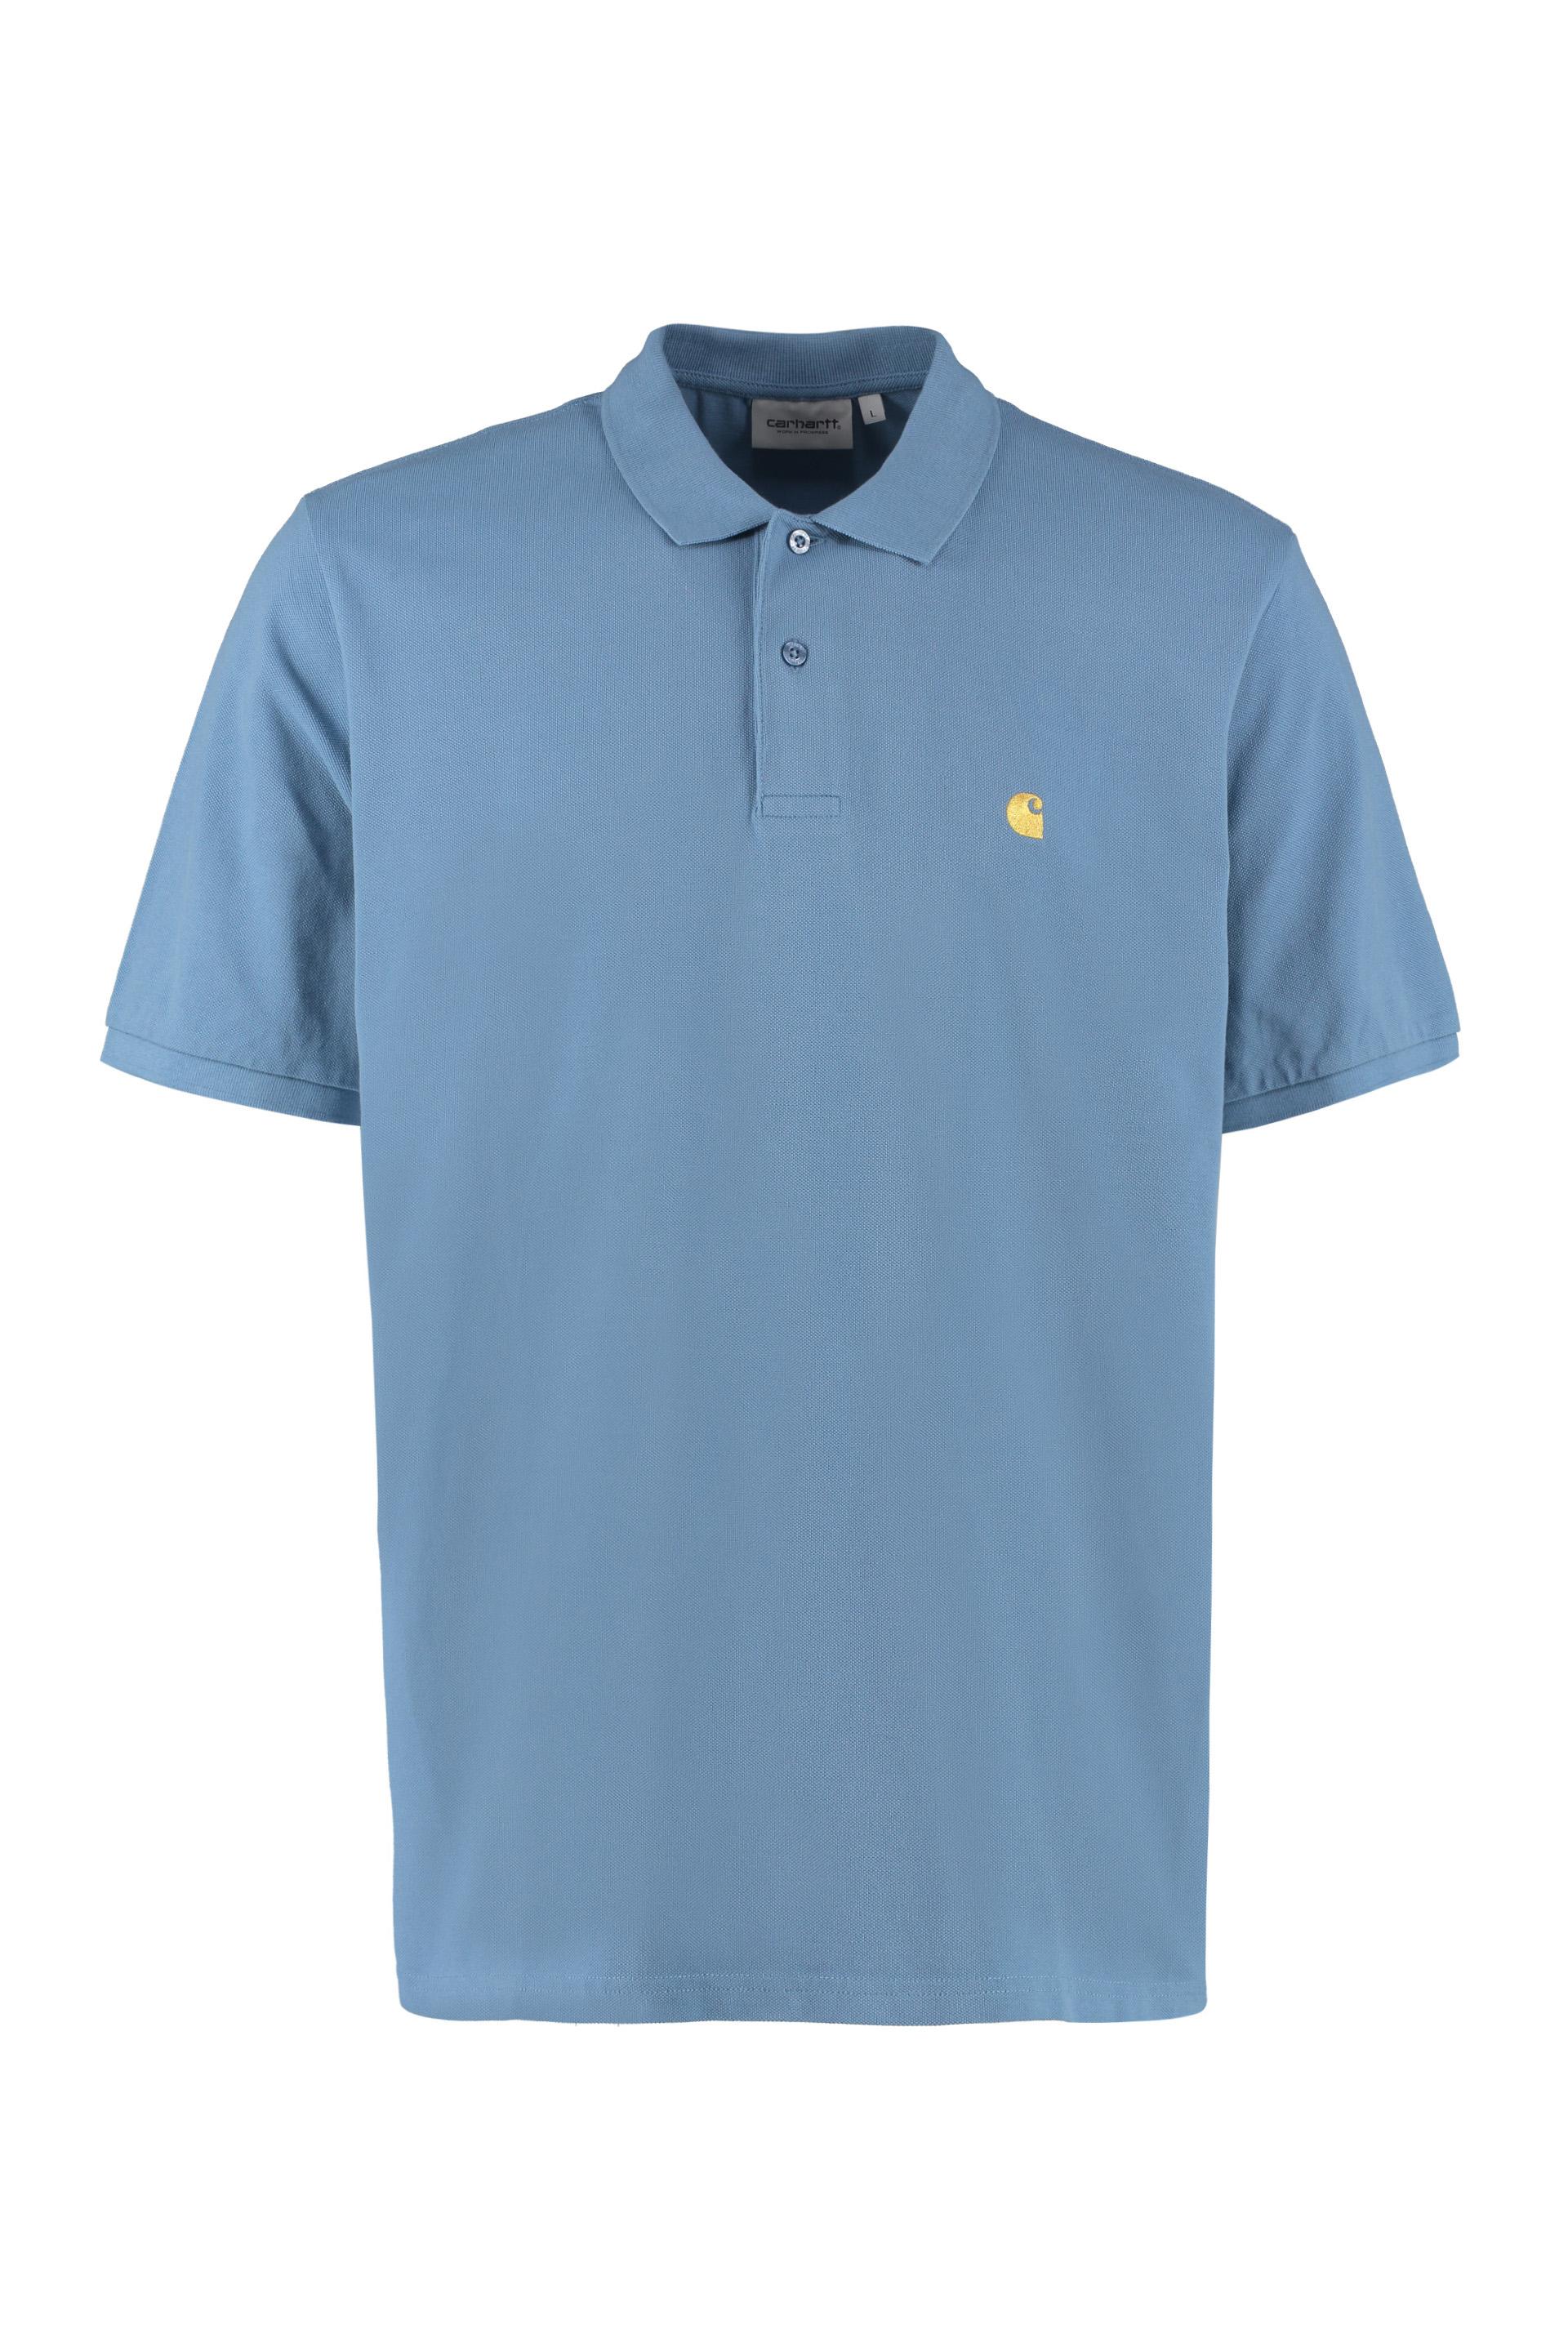 Carhartt WIP Chase Cotton Piqué Polo Shirt in Blue for Men | Lyst